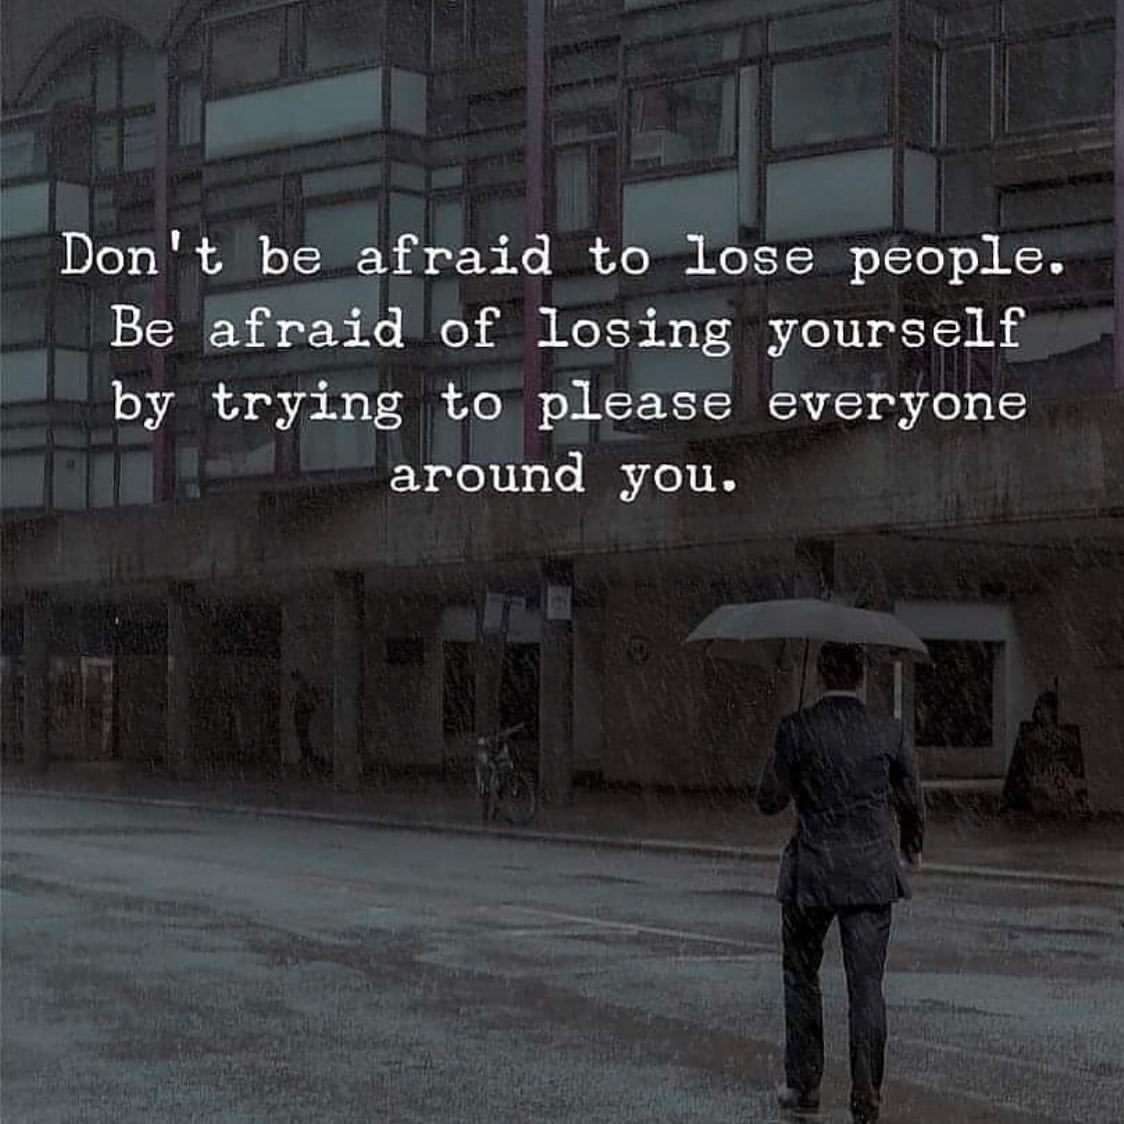 Don't be afraid to lose people. Be afraid of losing yourself by trying to please everyone around you.